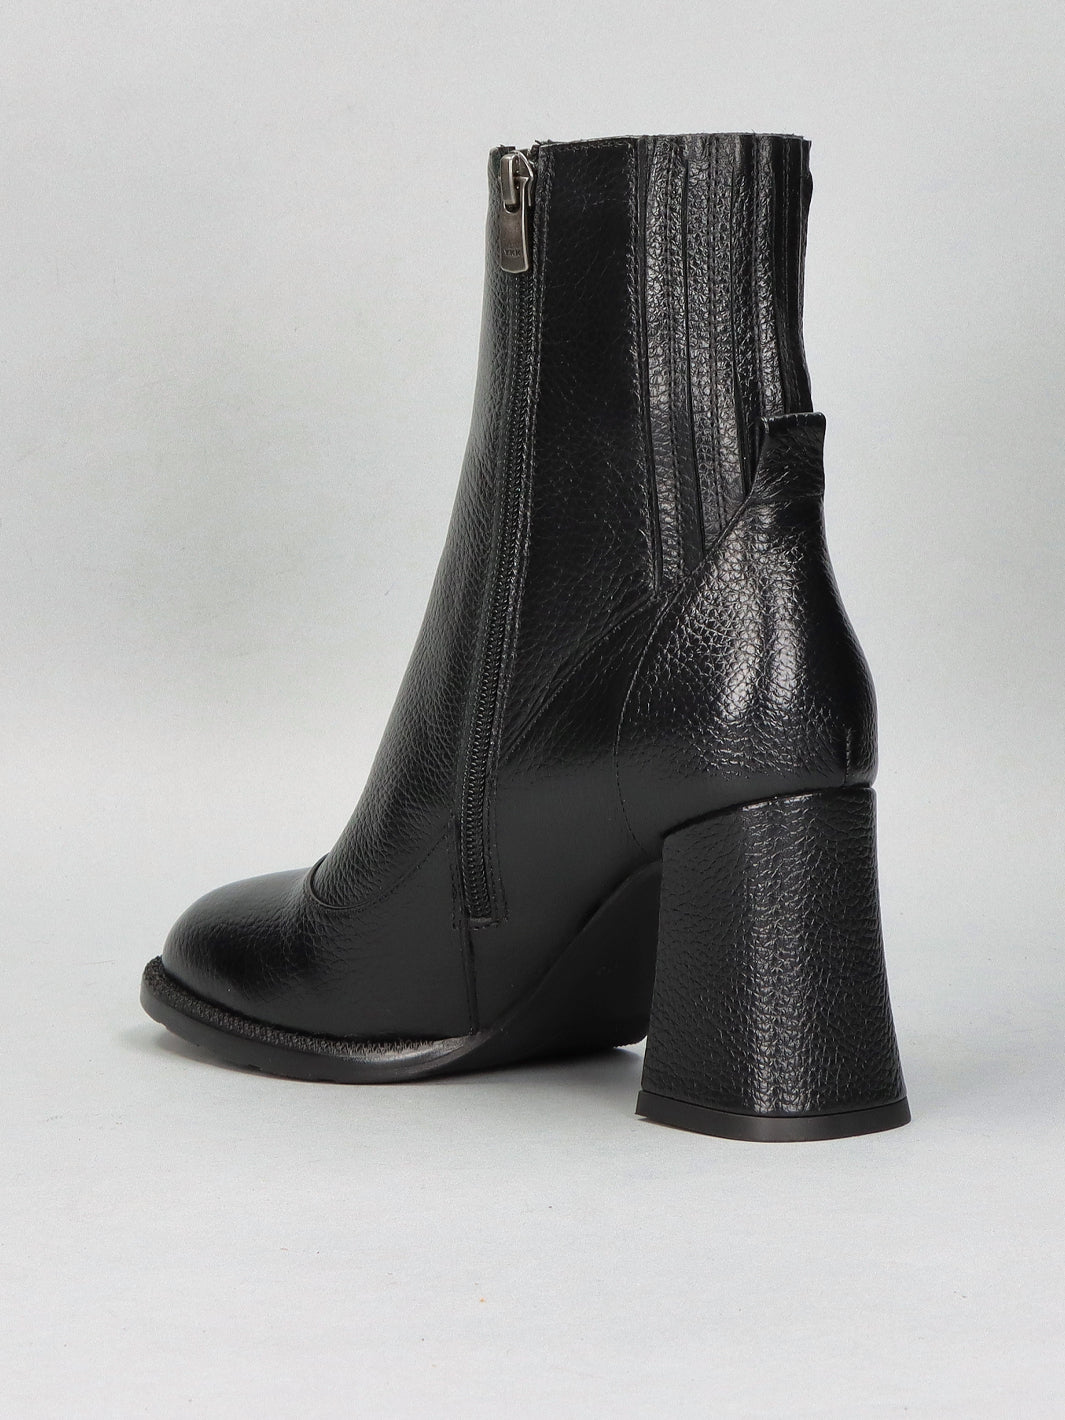 LEATHER BOOTS - BLACK